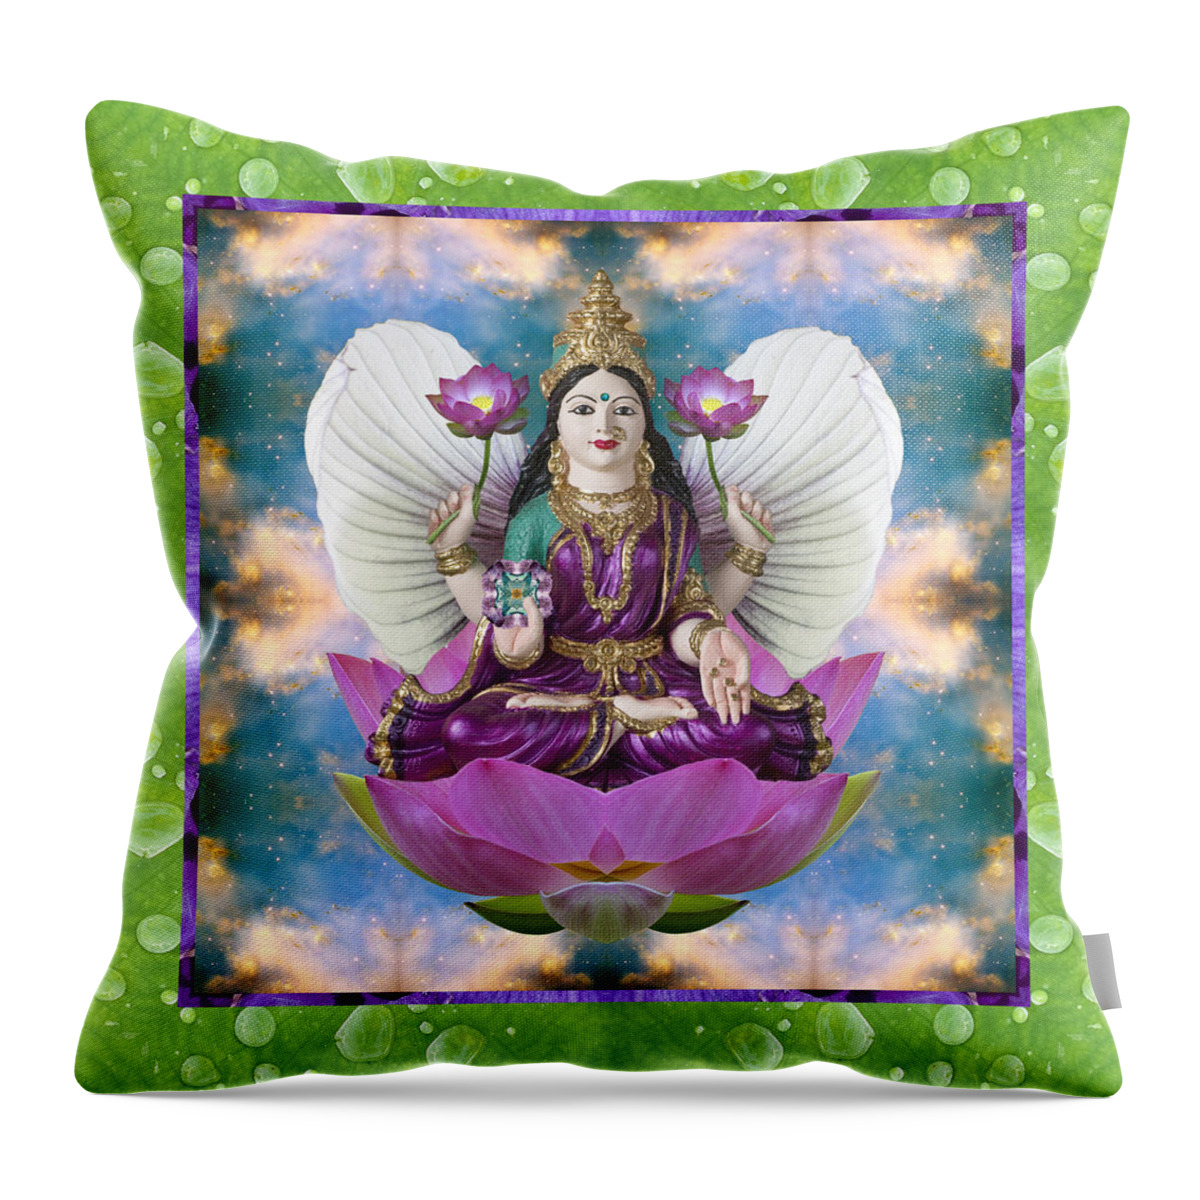 T-shirts Throw Pillow featuring the photograph Padma Lotus by Bell And Todd